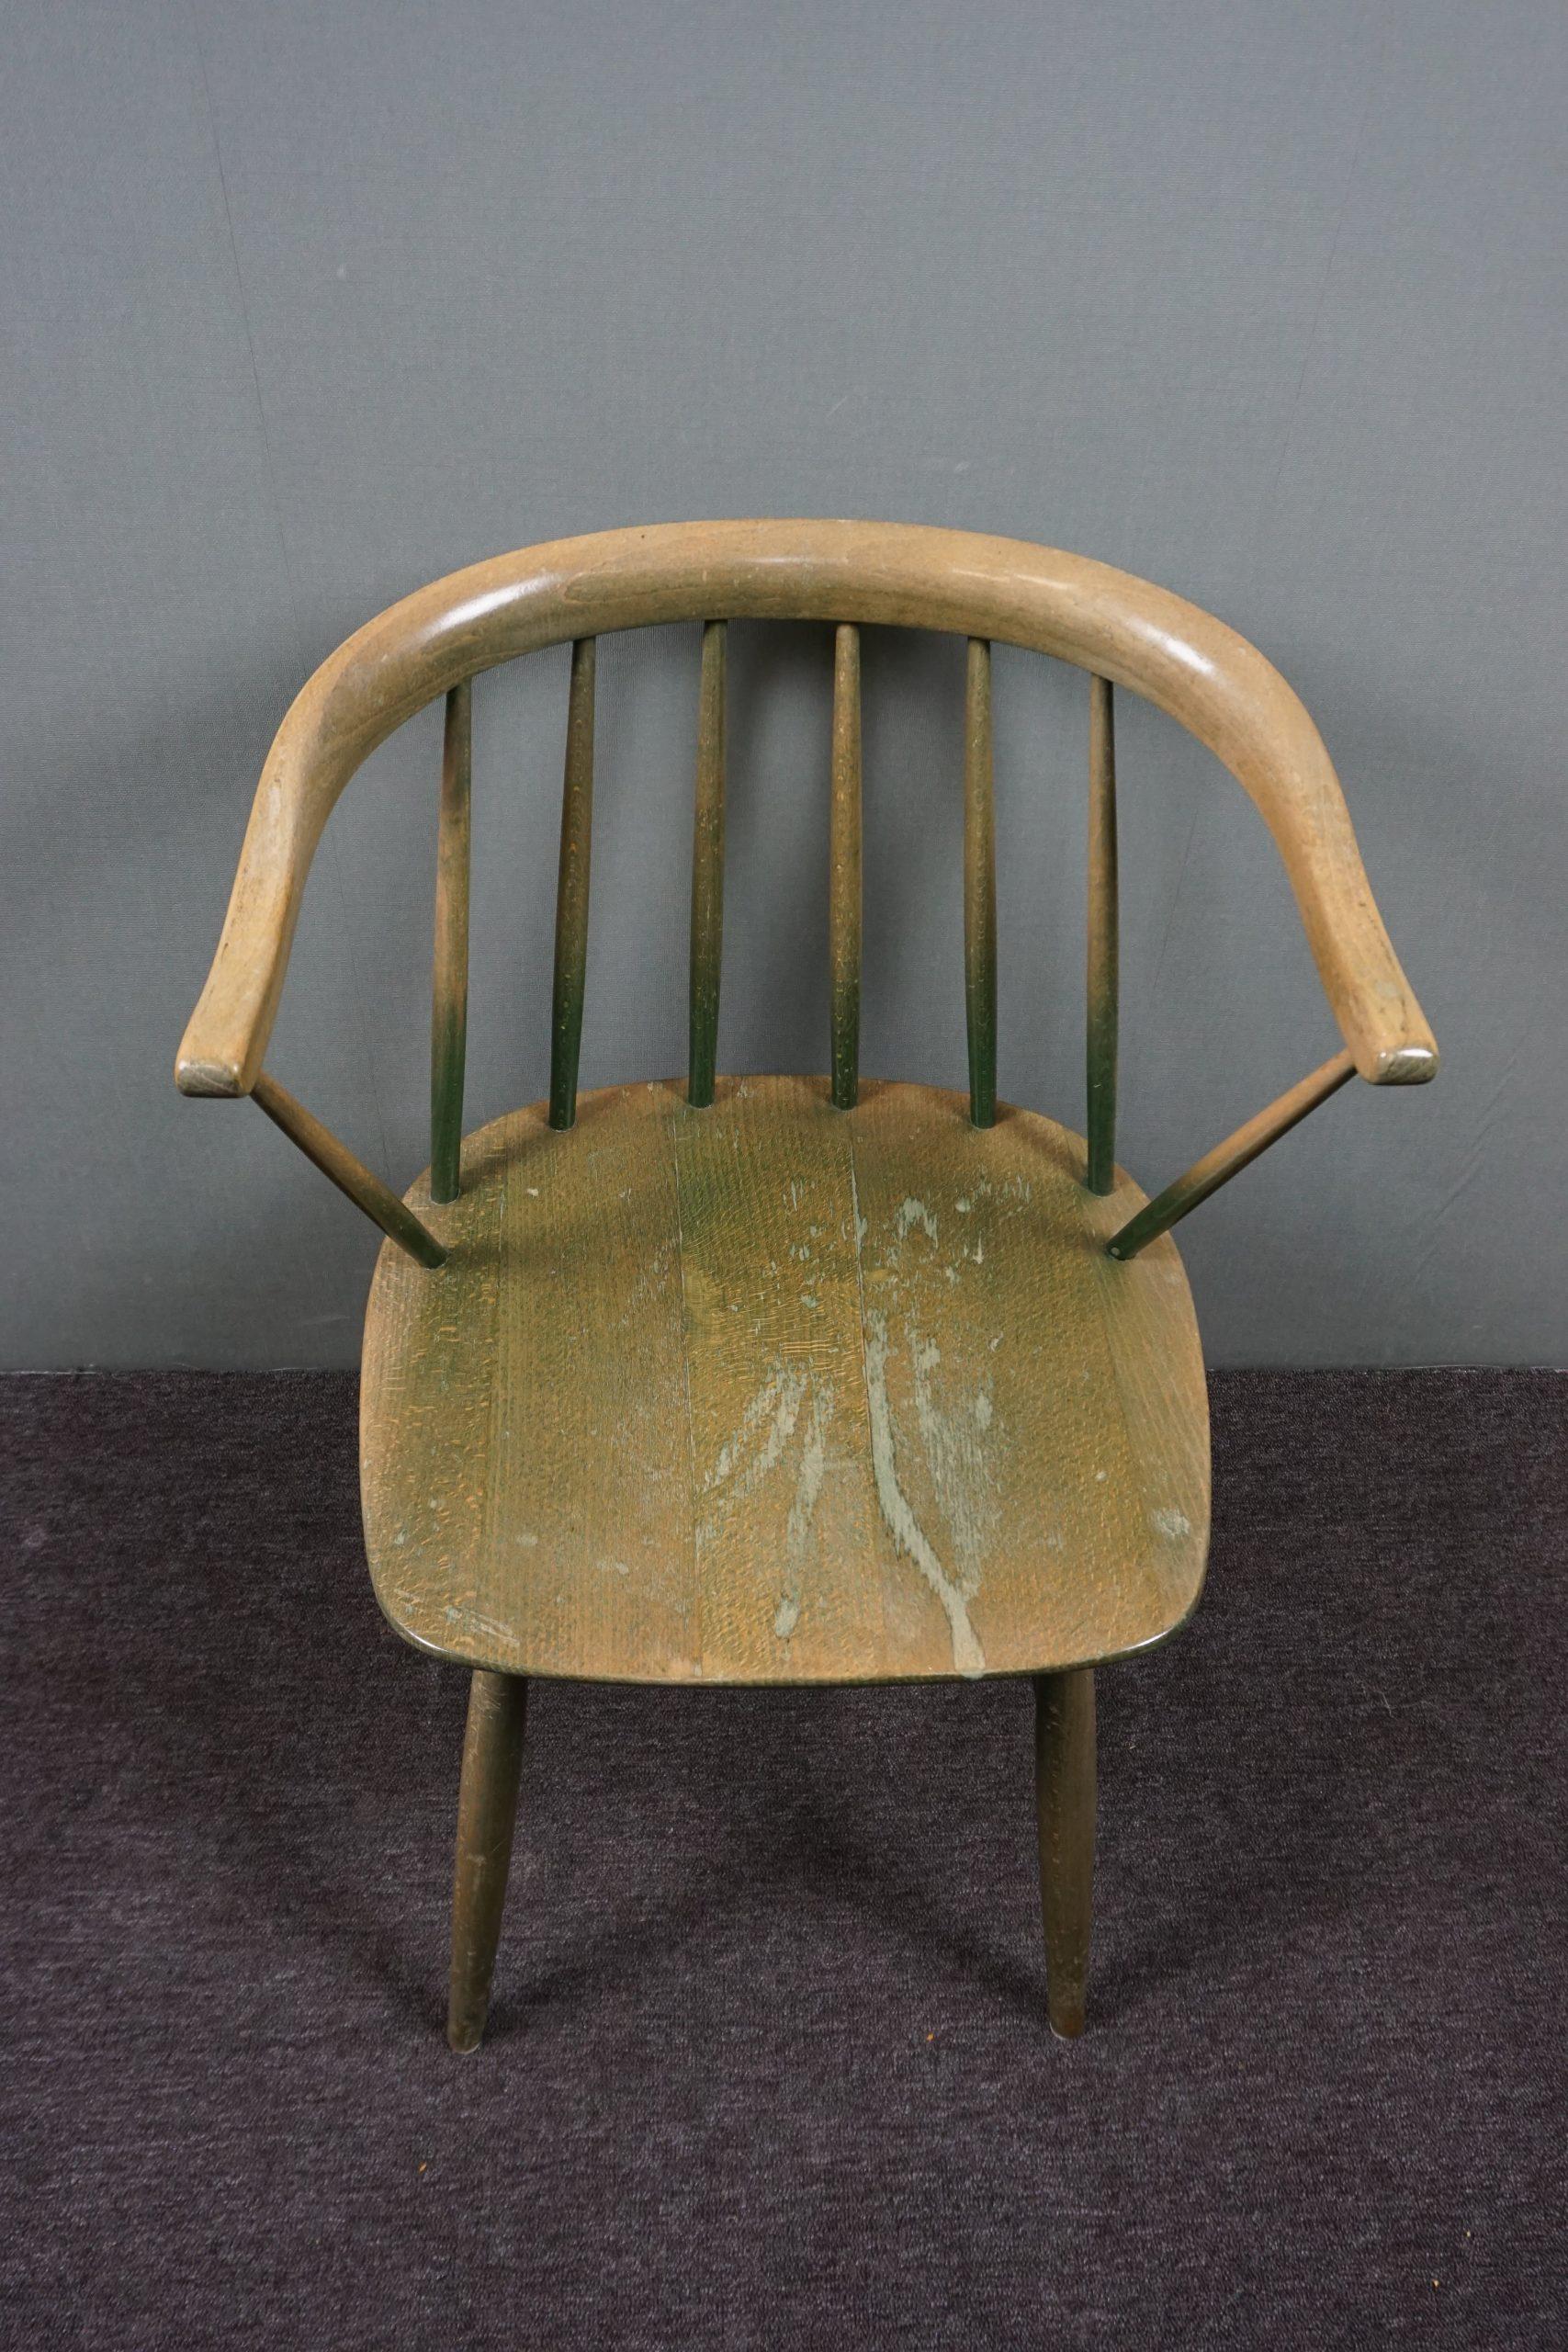 Wood Beautiful vintage worn green spindle chair For Sale